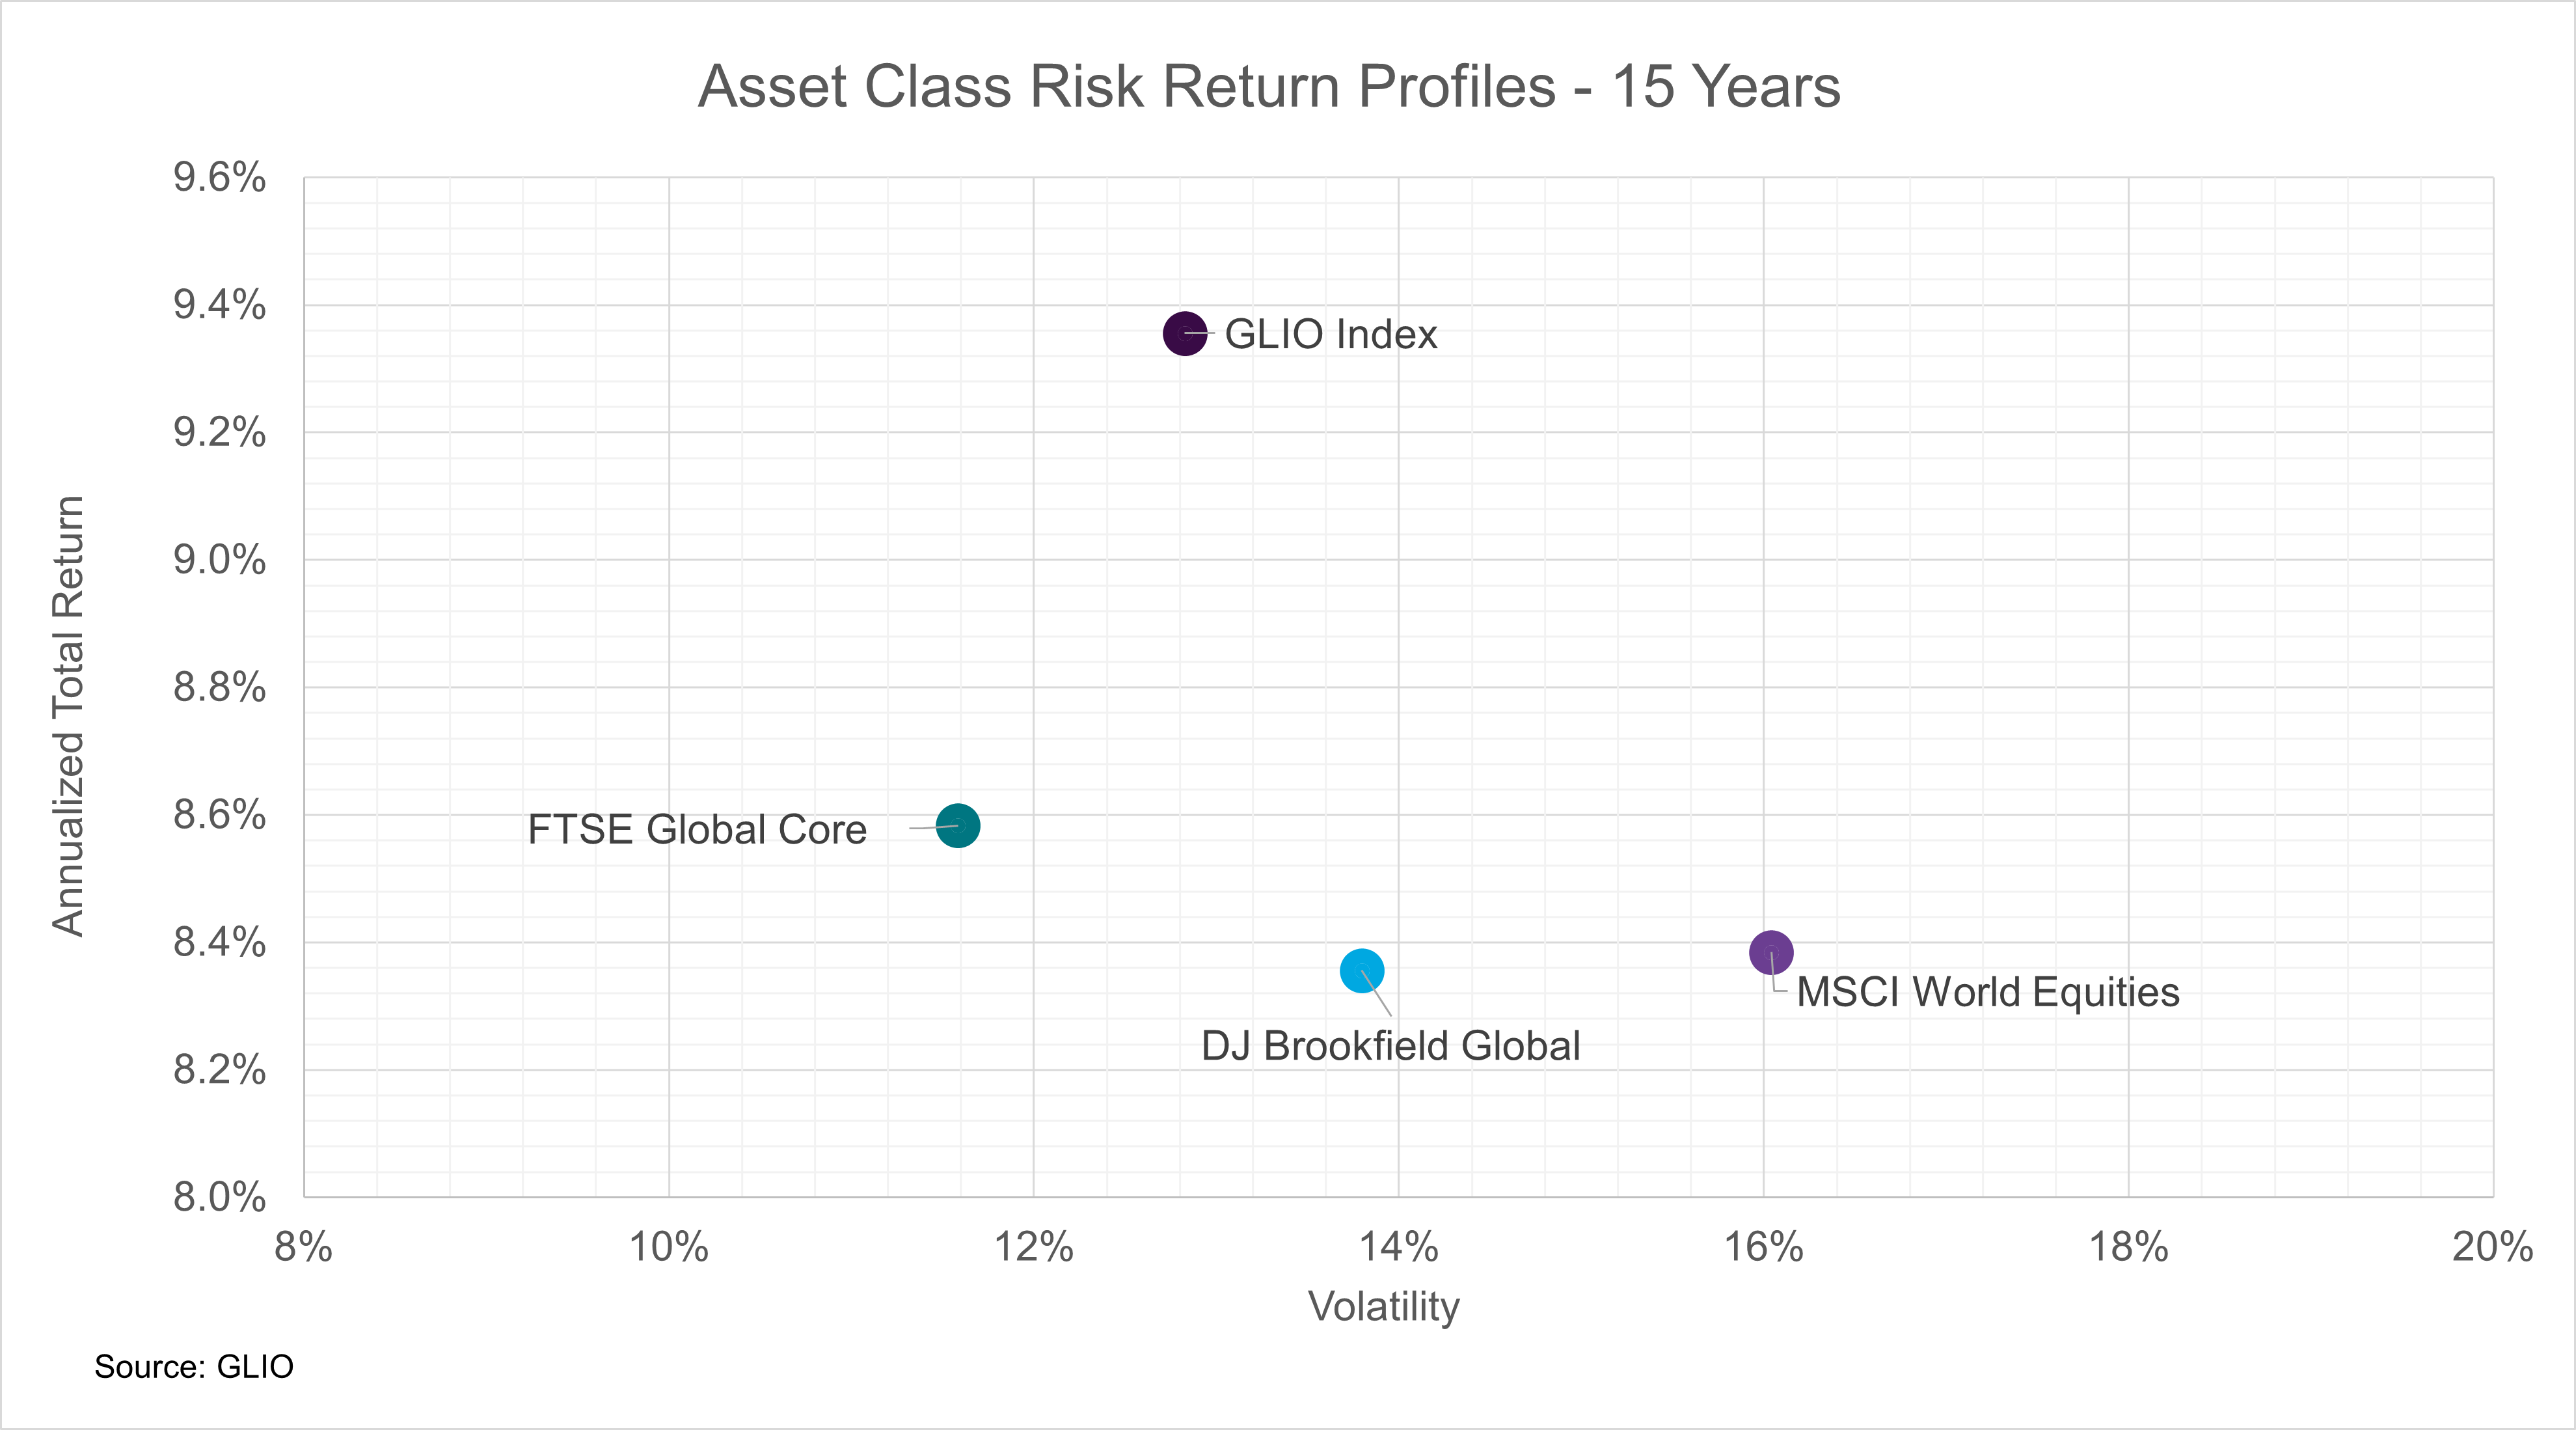 HIGHER RETURNS COUPLED WITH LOWER VOLATILITY